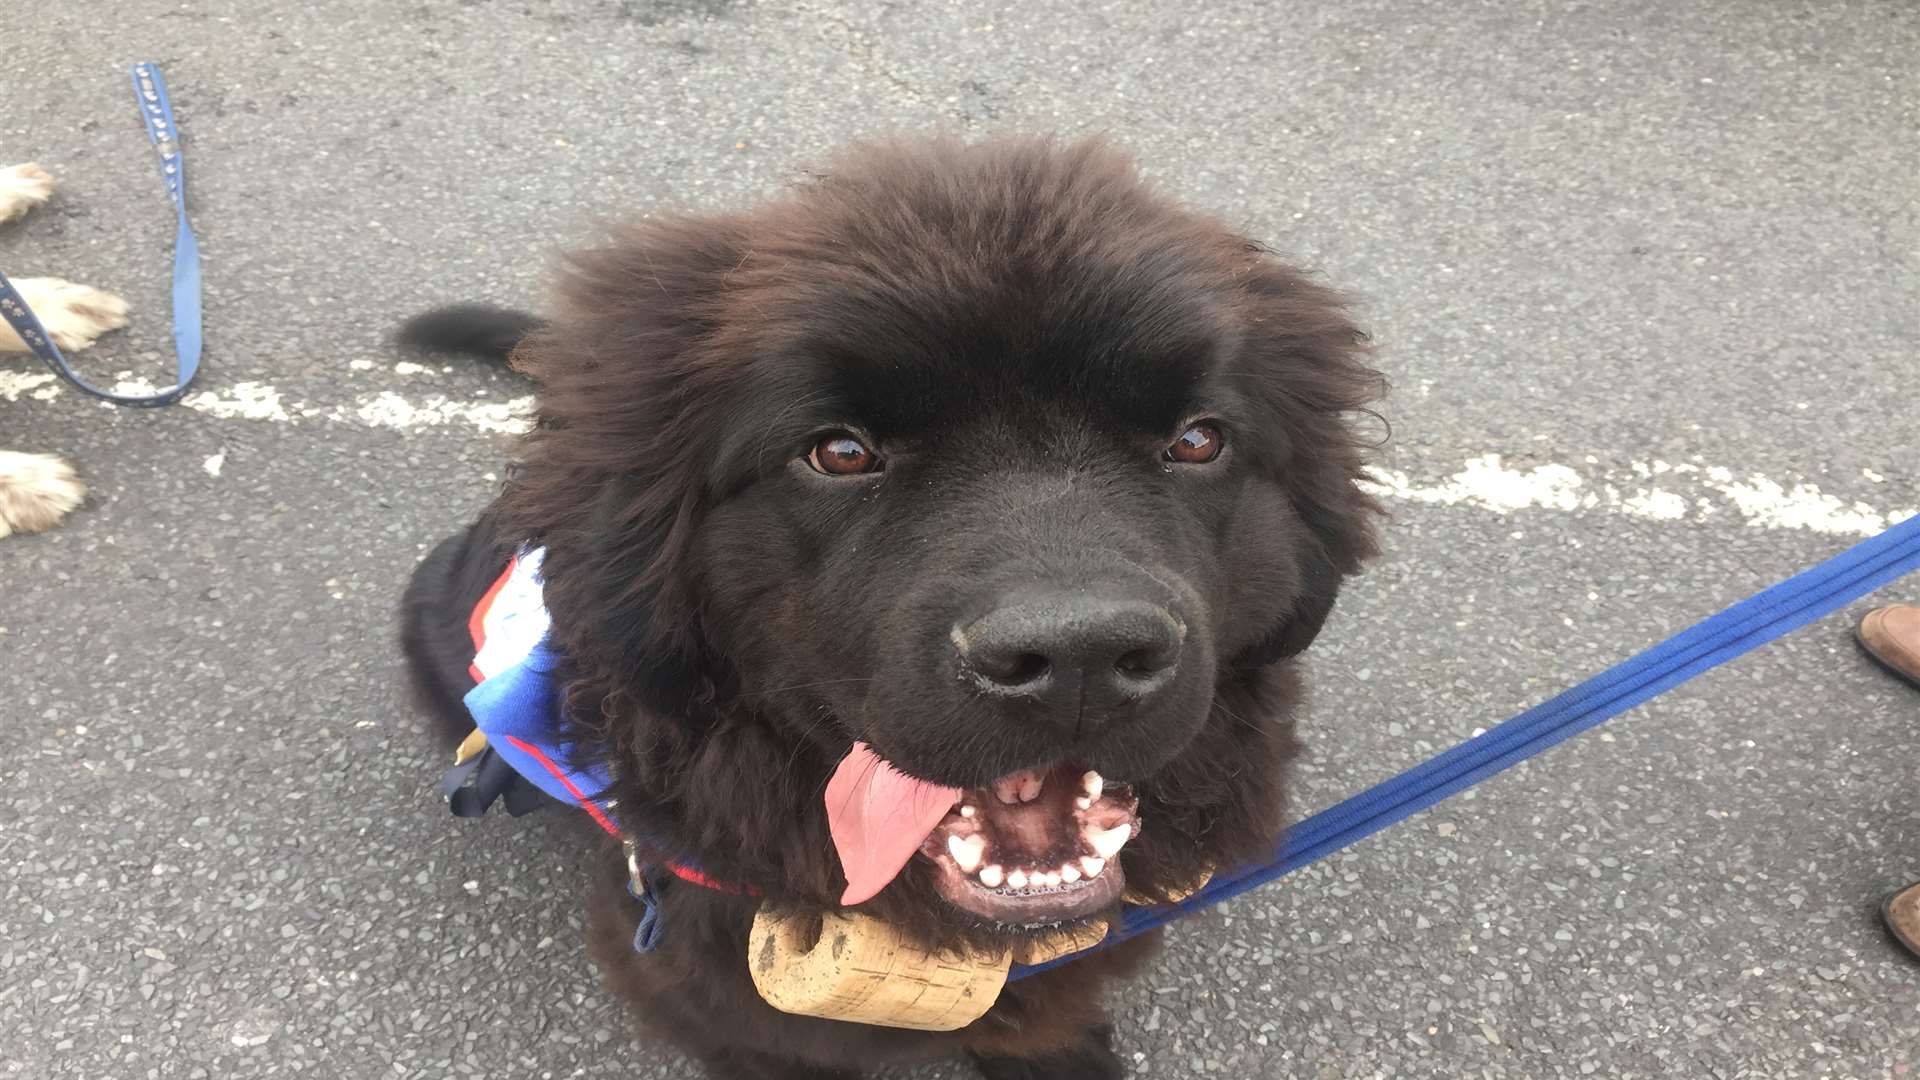 Eight Newfoundlands are taking part in this year's carnival